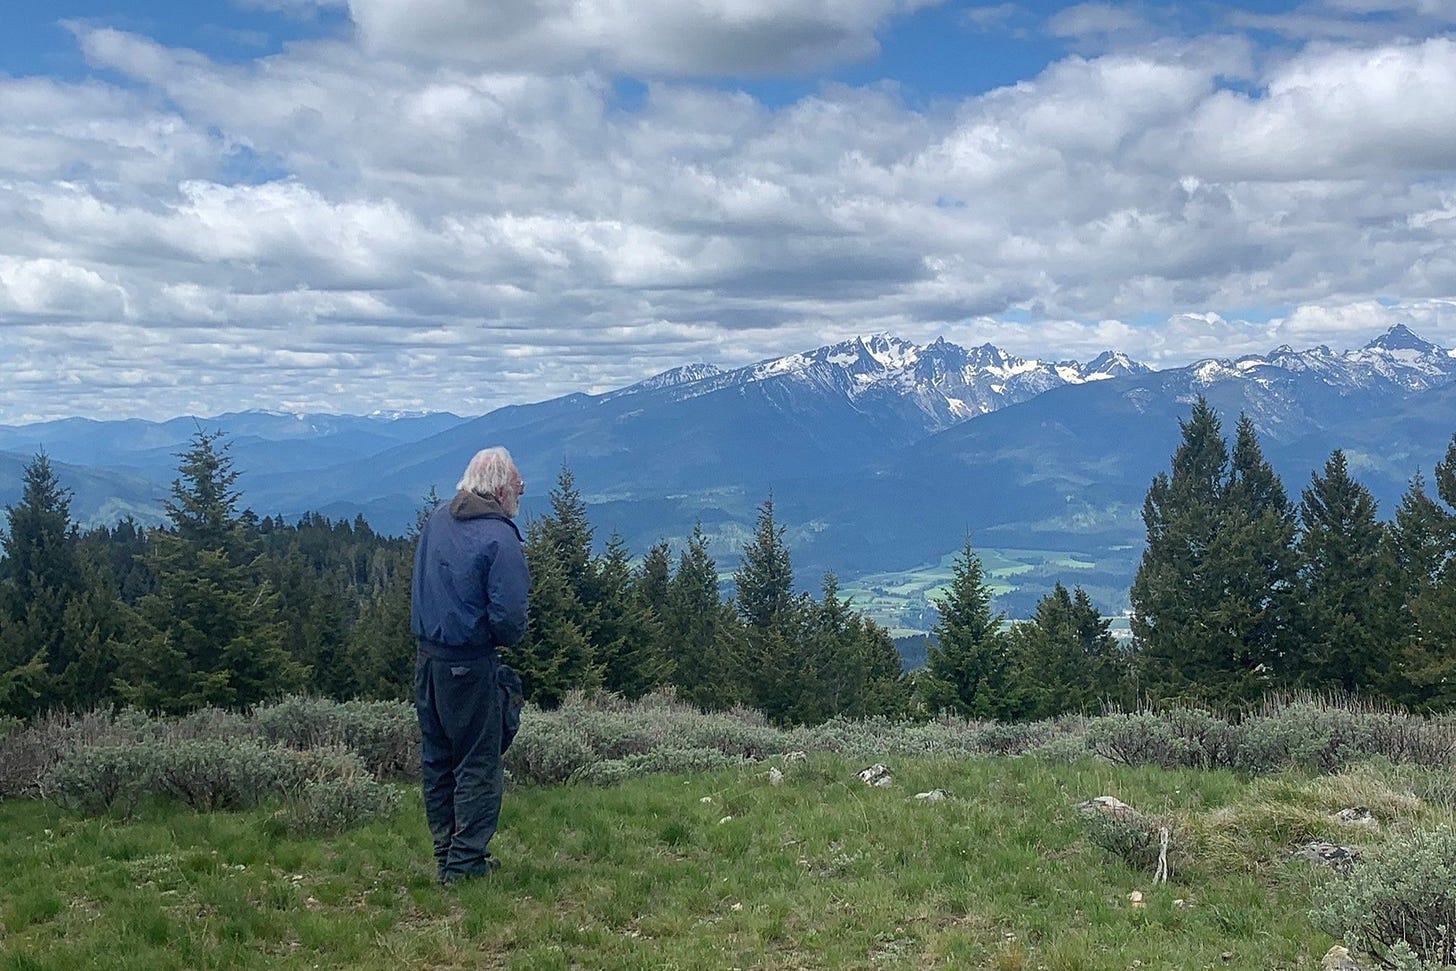 A person with gray hair stands with their back to the camera, overlooking a vast, bluish mountain range.